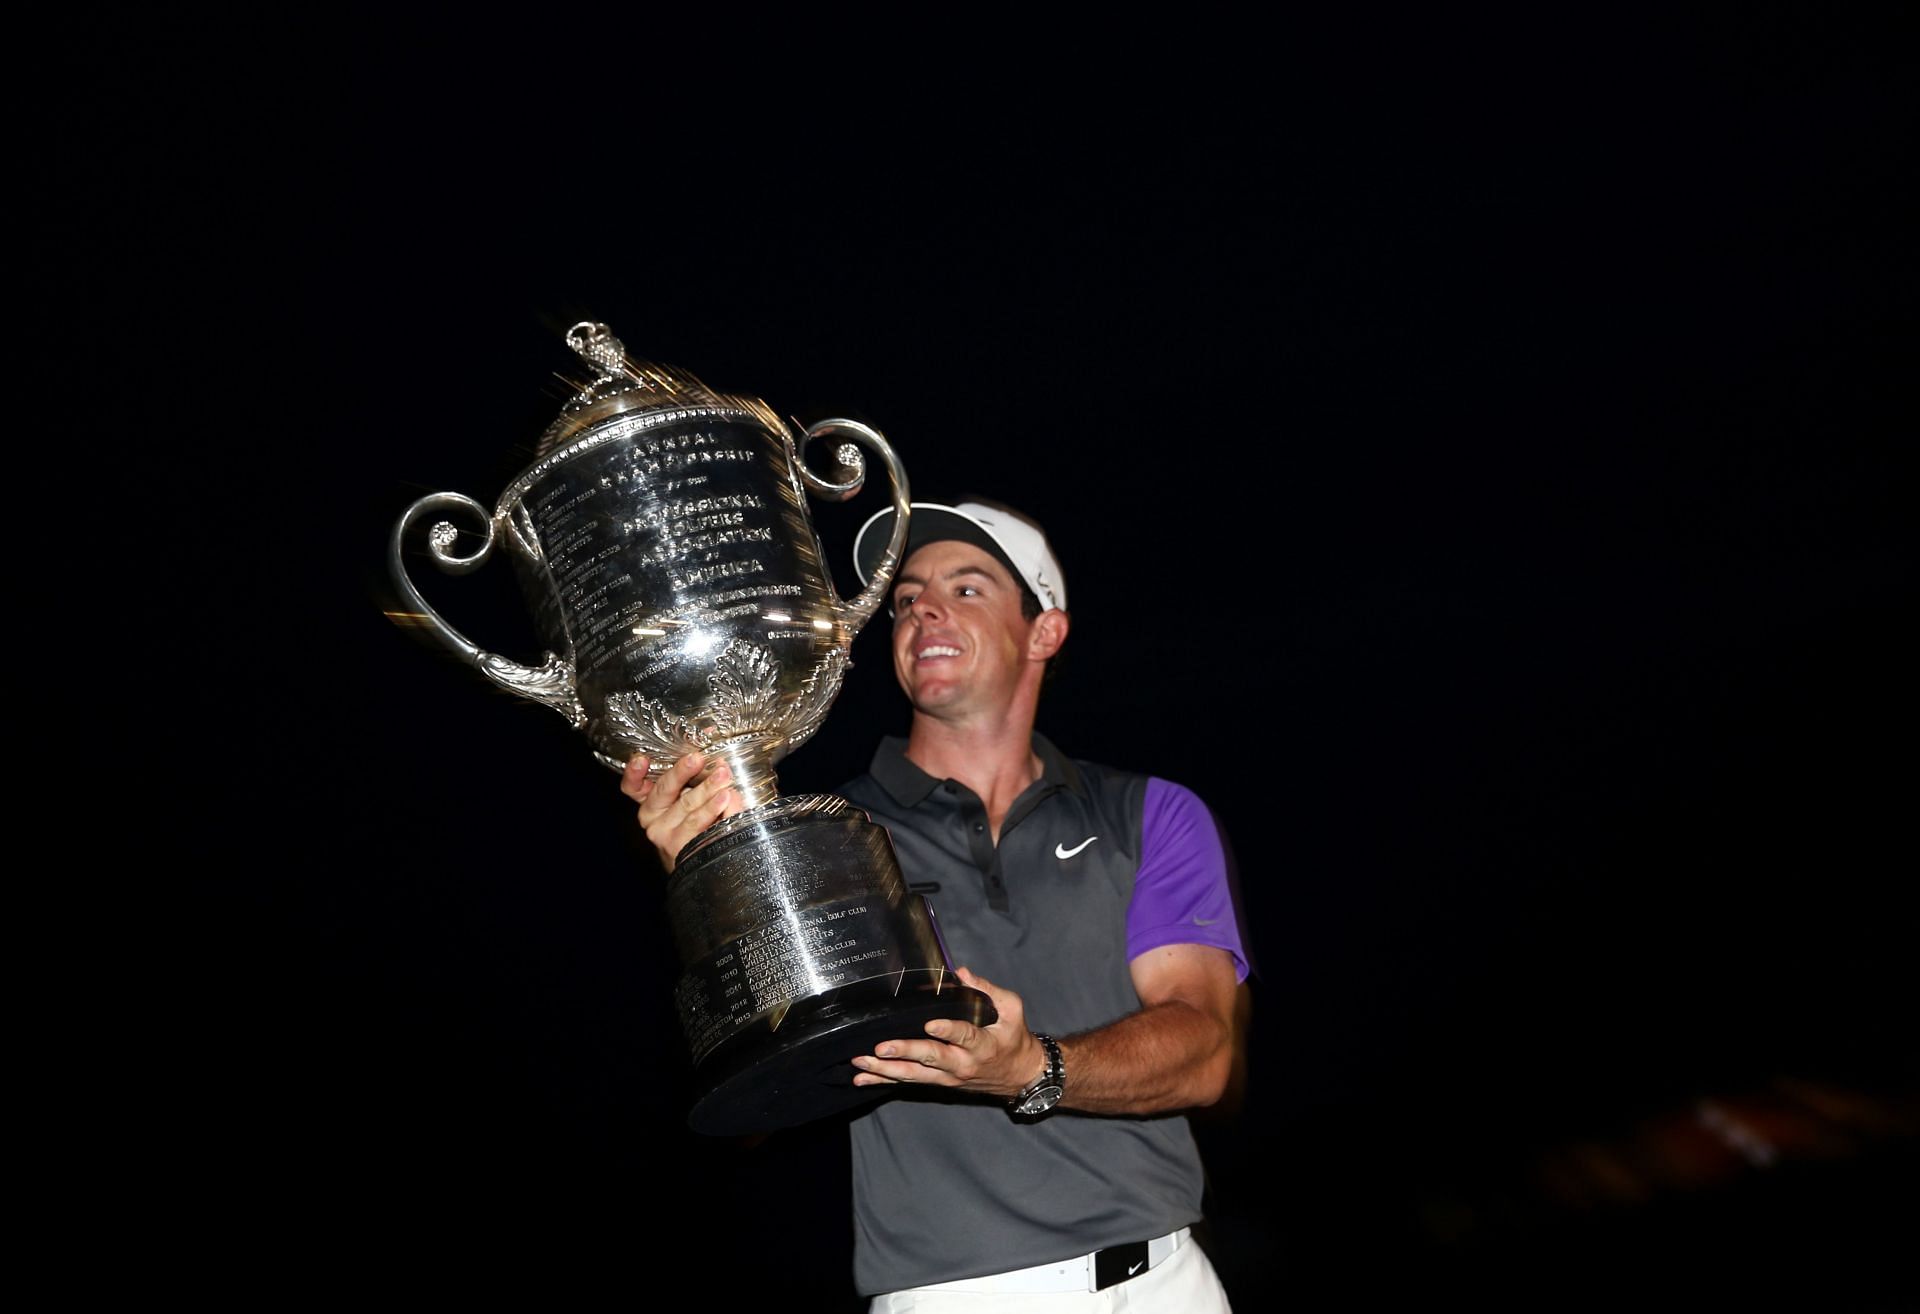 Rory McIlroy with the 2014 PGA Championship trophy